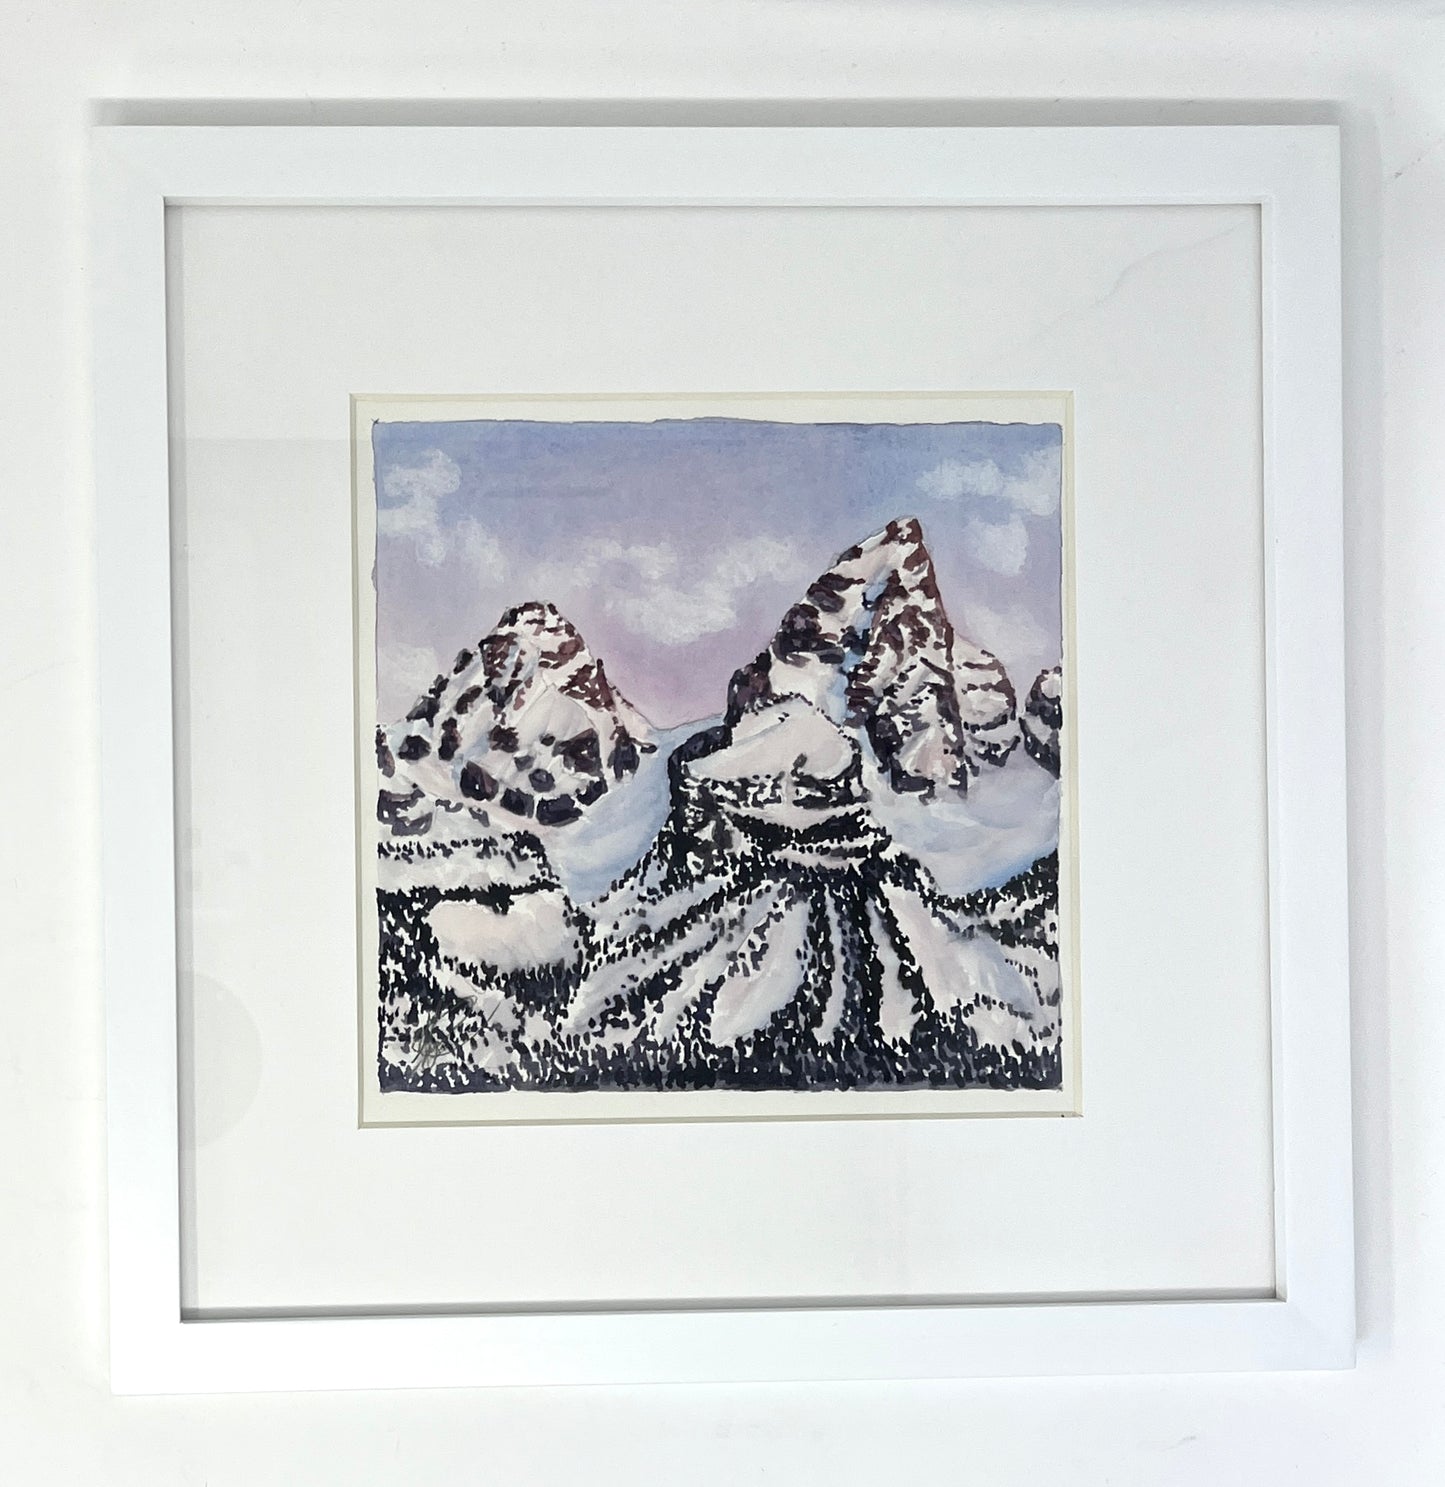 Natalie Connell: Watercolor 9 x 9 inches (framed)